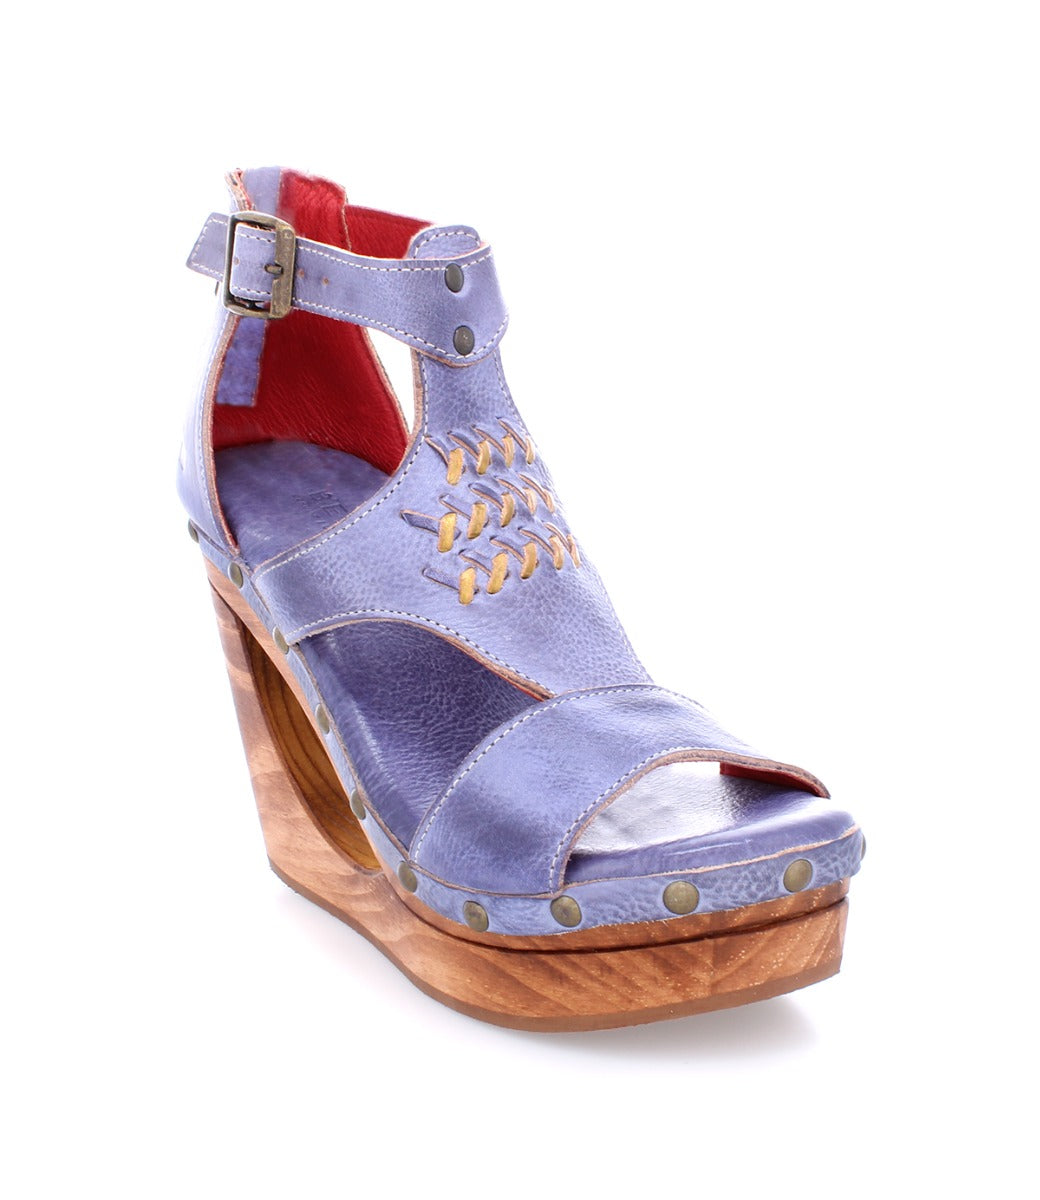 A women's blue wedge sandal with wooden platform named Millennial from the brand Bed Stu.